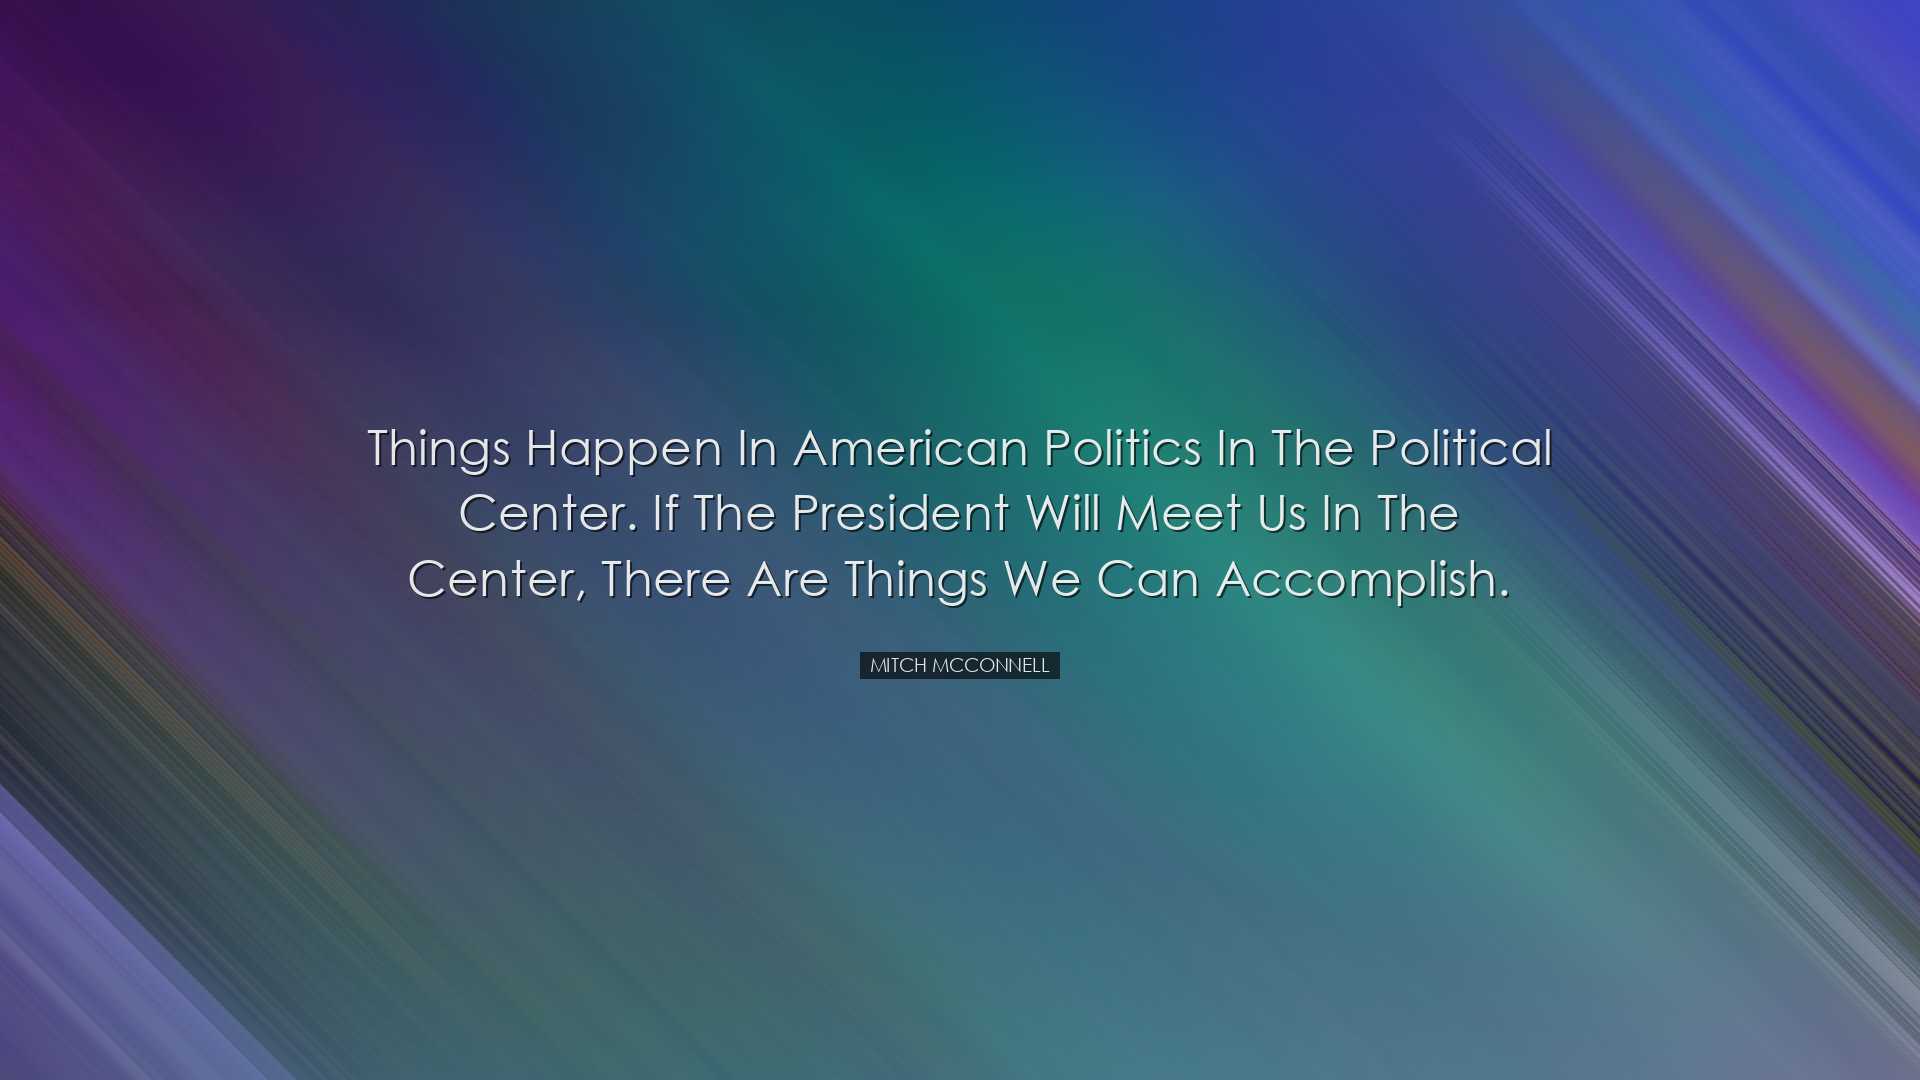 Things happen in American politics in the political center. If the